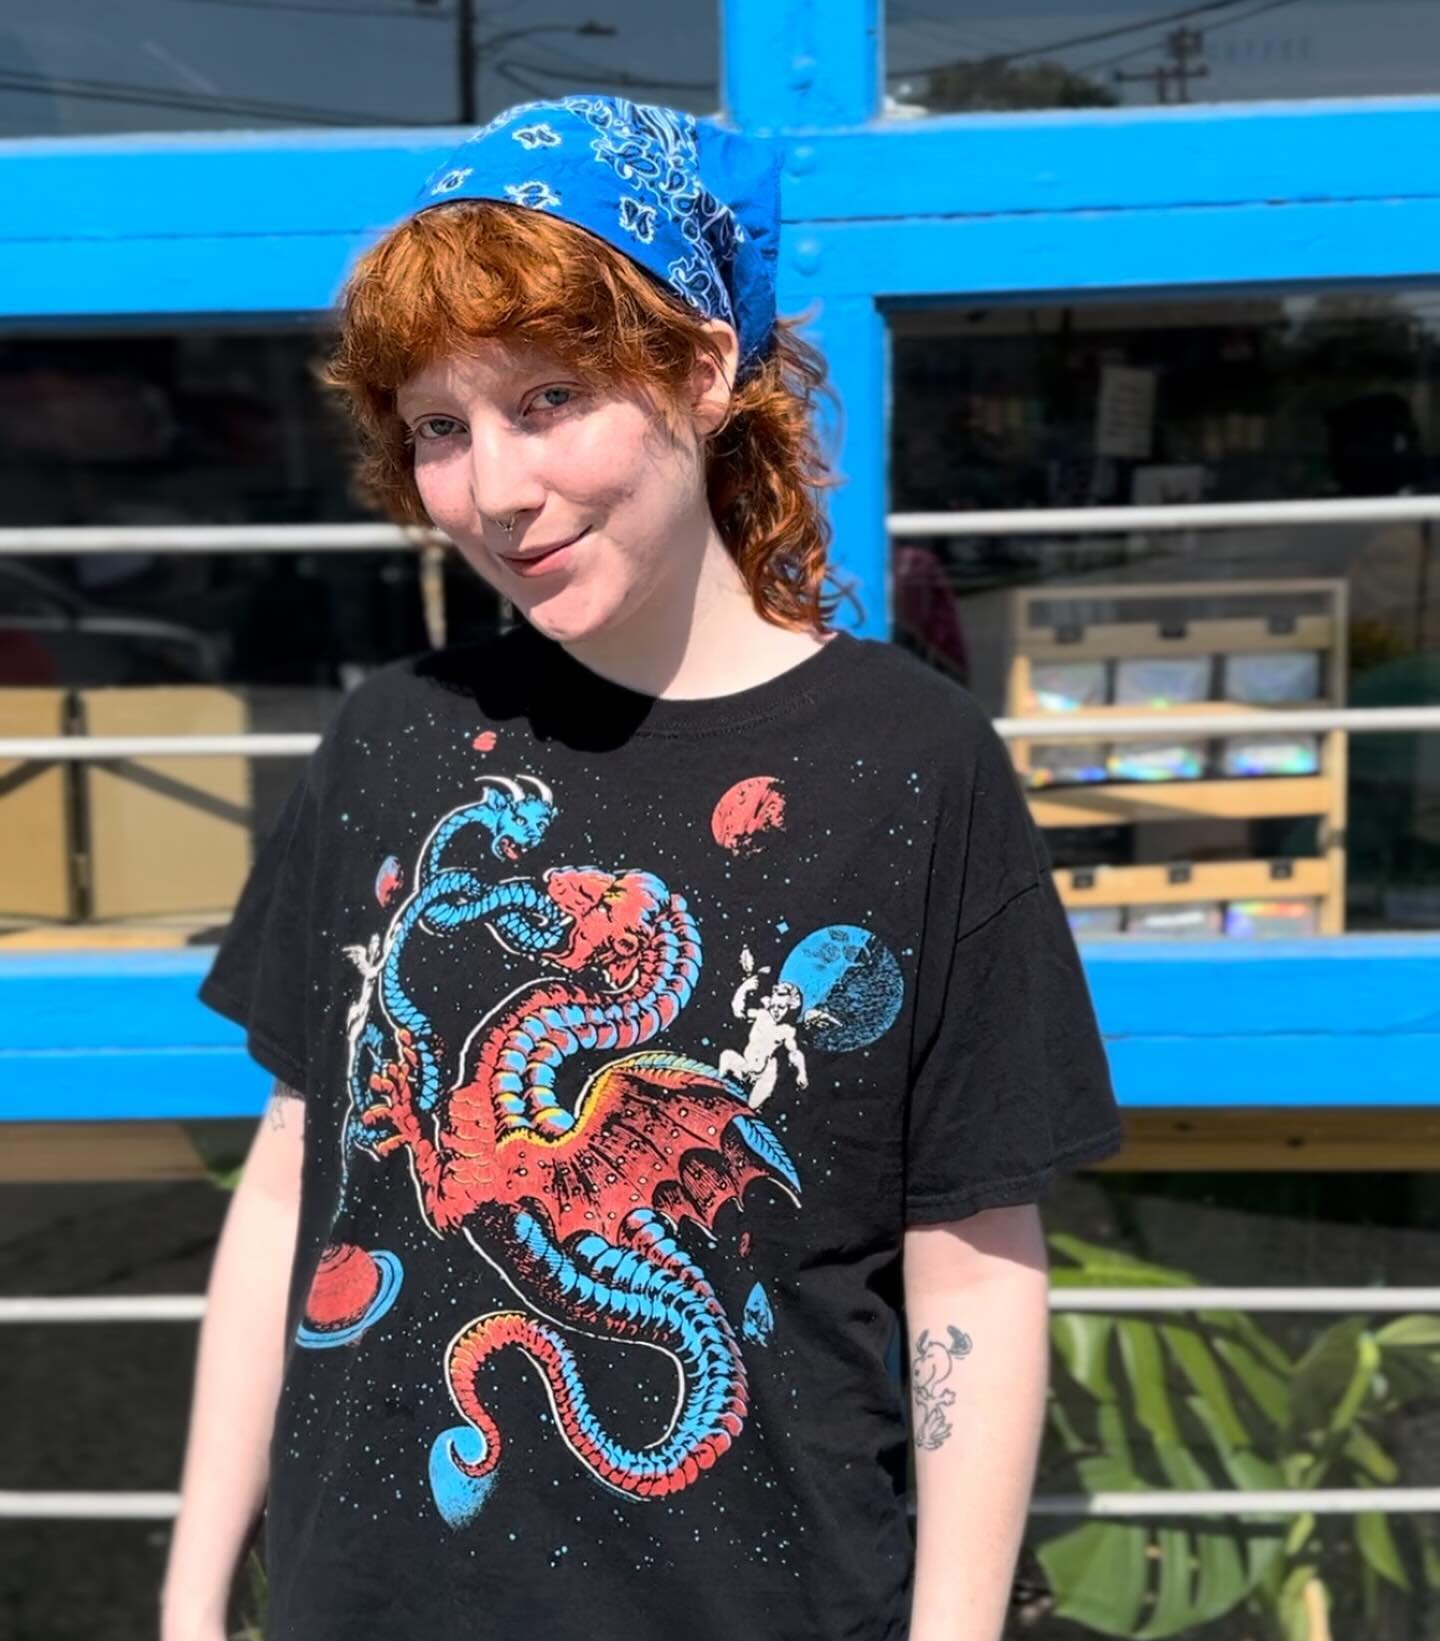 Introducing Gail!!!! 💙🧡

Gail just joined our team a few weeks ago and we are stoked to have them on board! Gail is an Aries, has two adorable pups, and is an all around joy to be around. 🥰 They are semi-fluent in French and are a huge fan of rabb